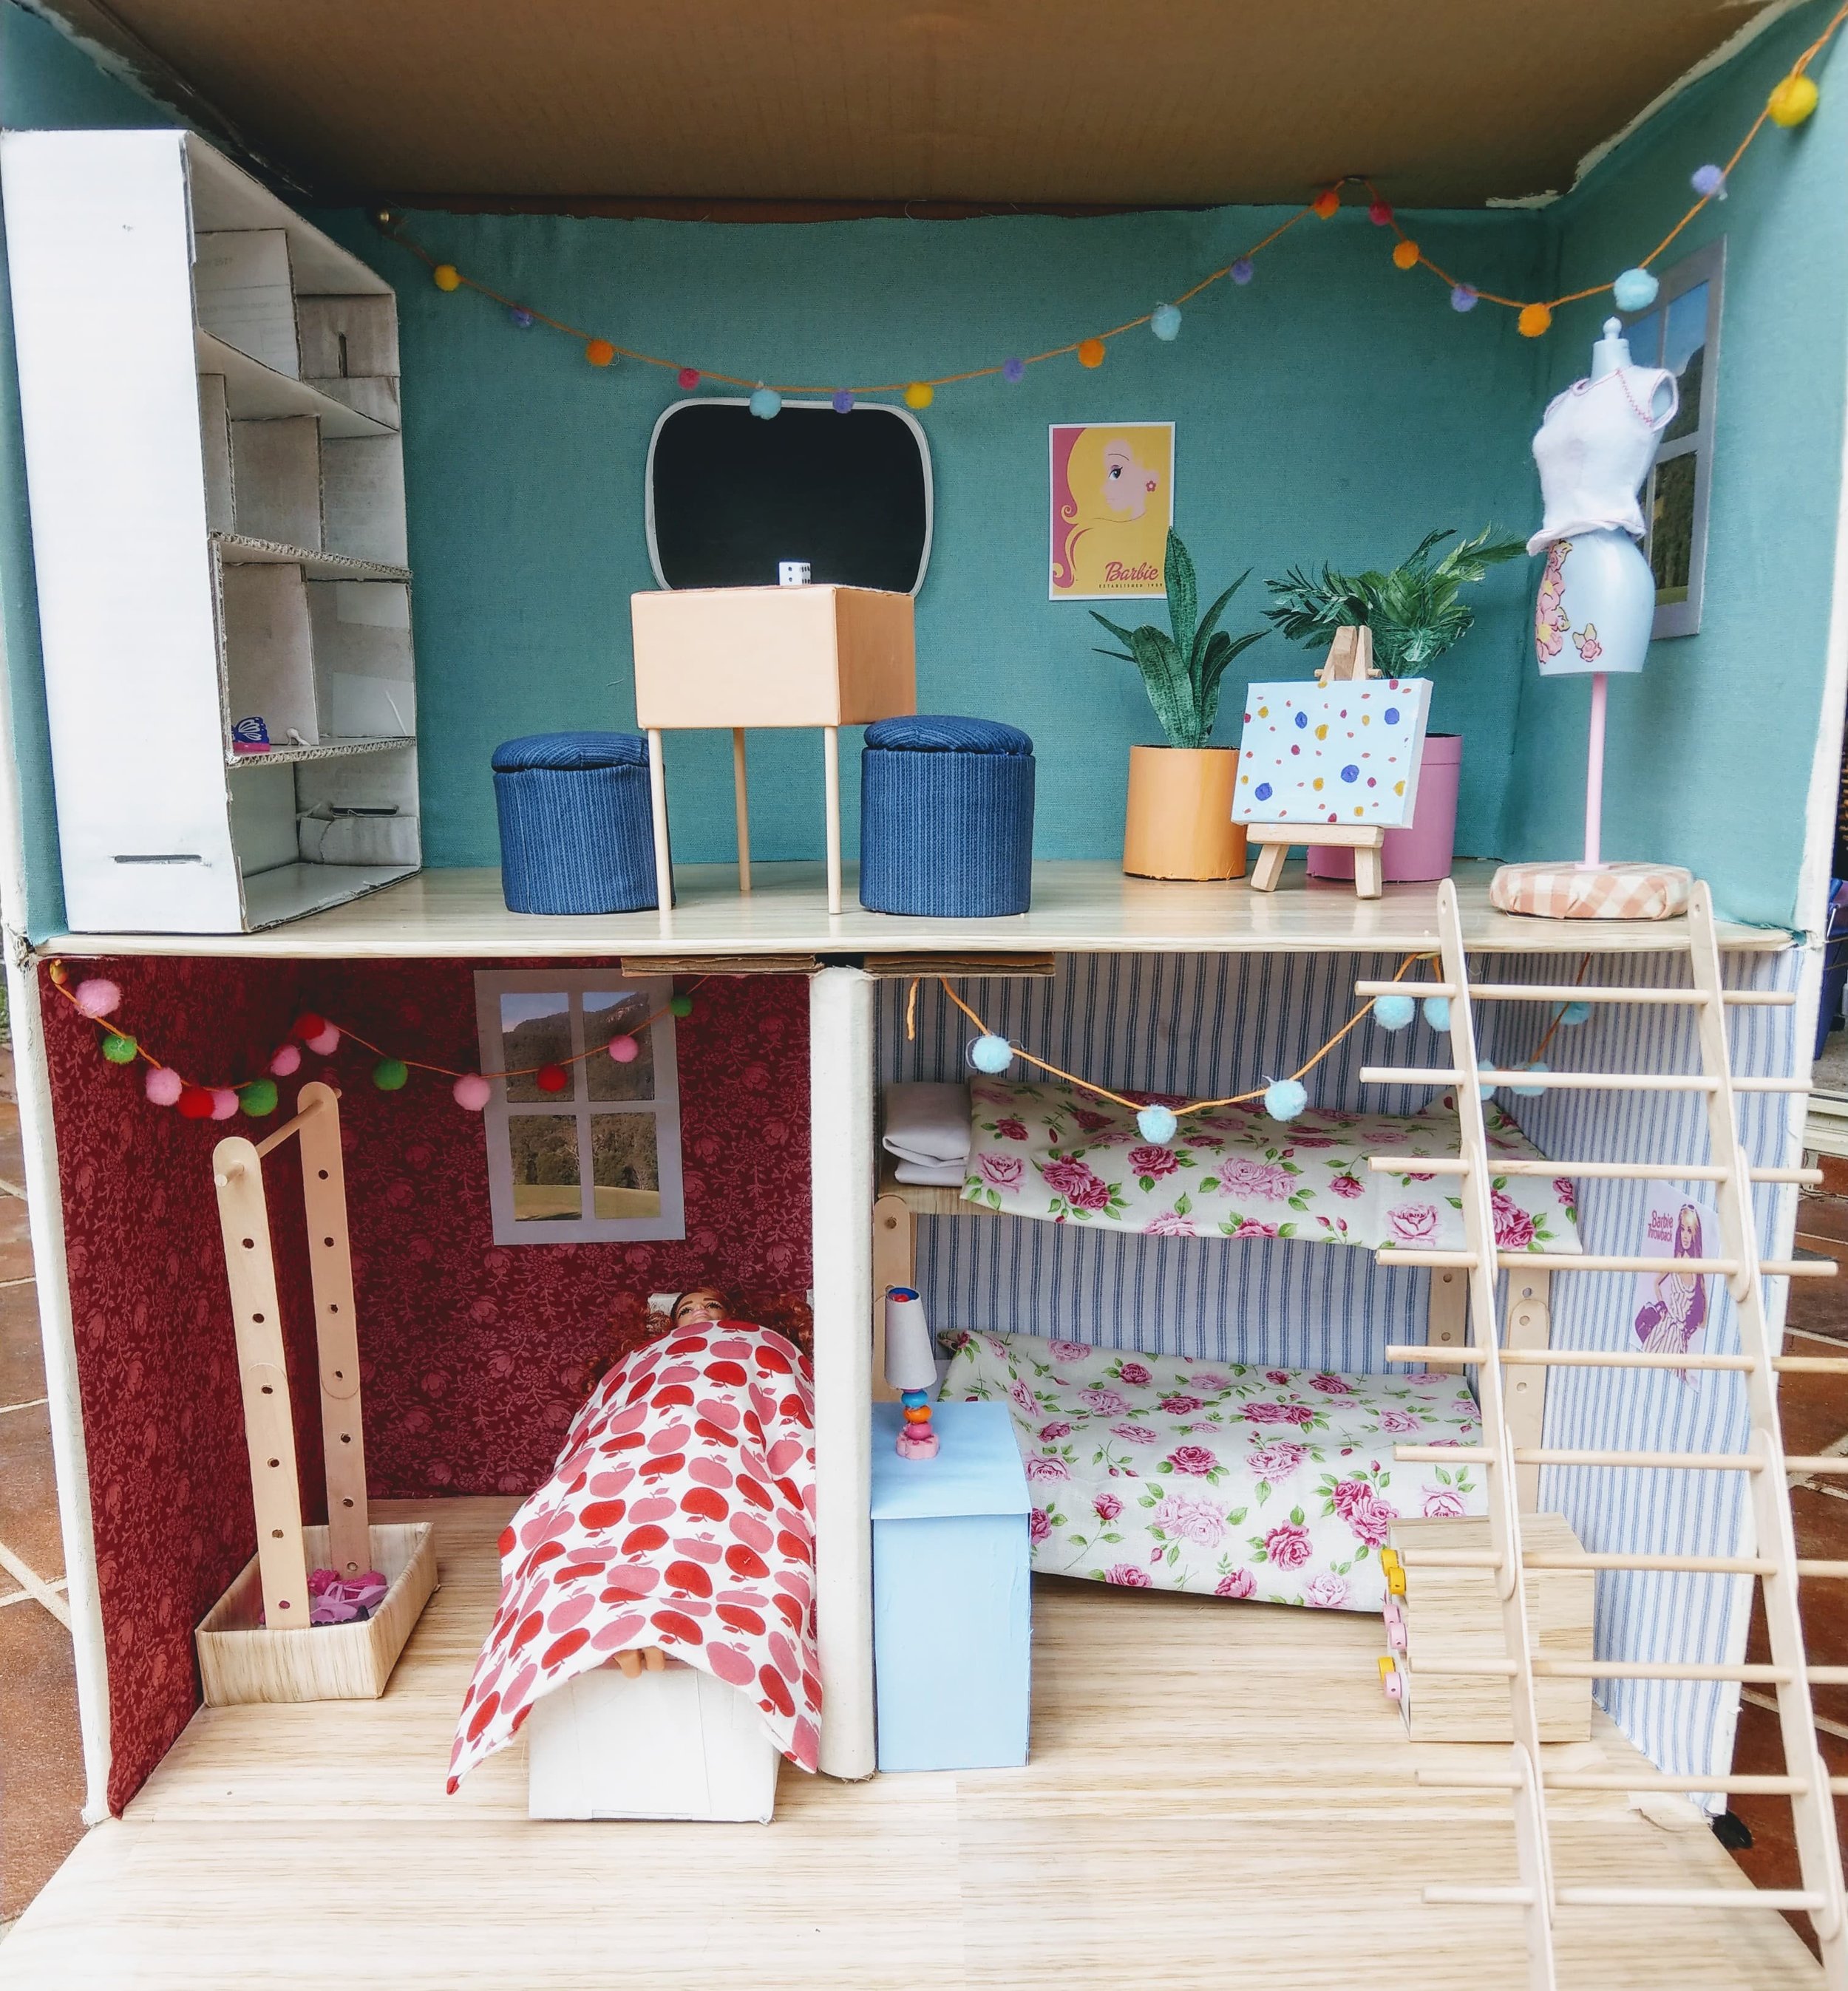 how to make a barbie house out of cardboard boxes